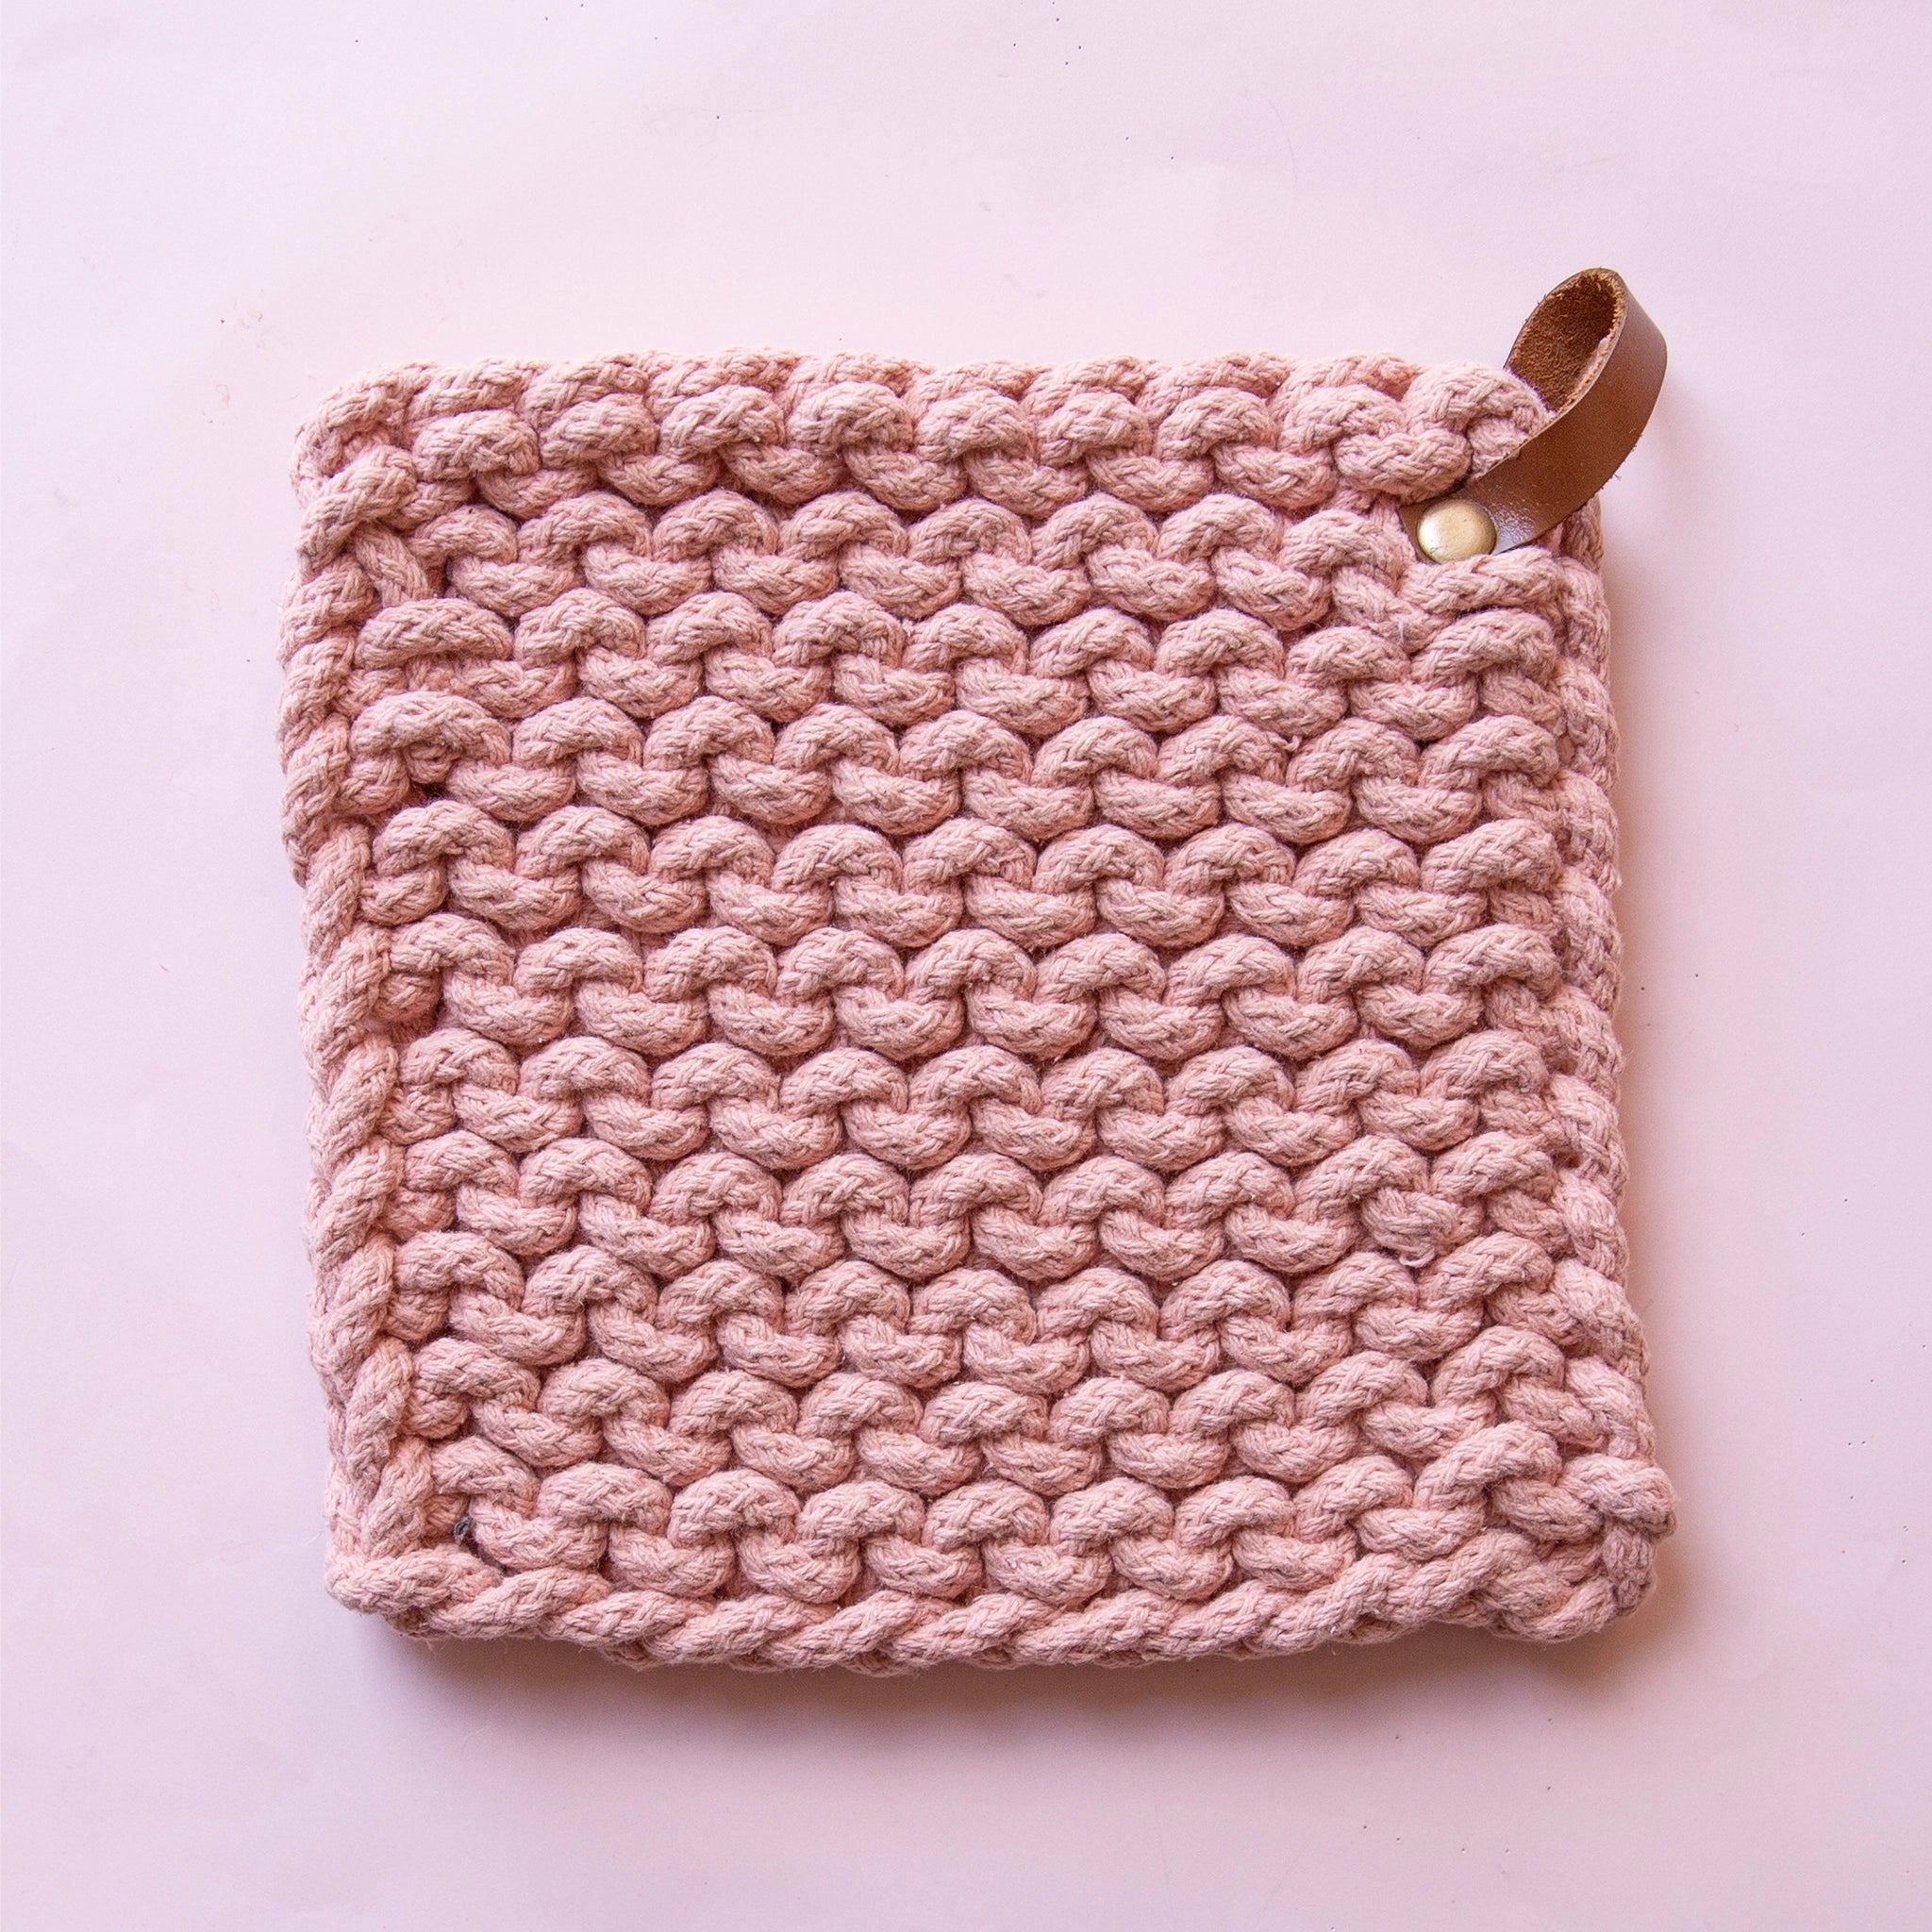 On a pink background is a rose colored crocheted pot holder with a leather loop for hanging in the top right corner. 